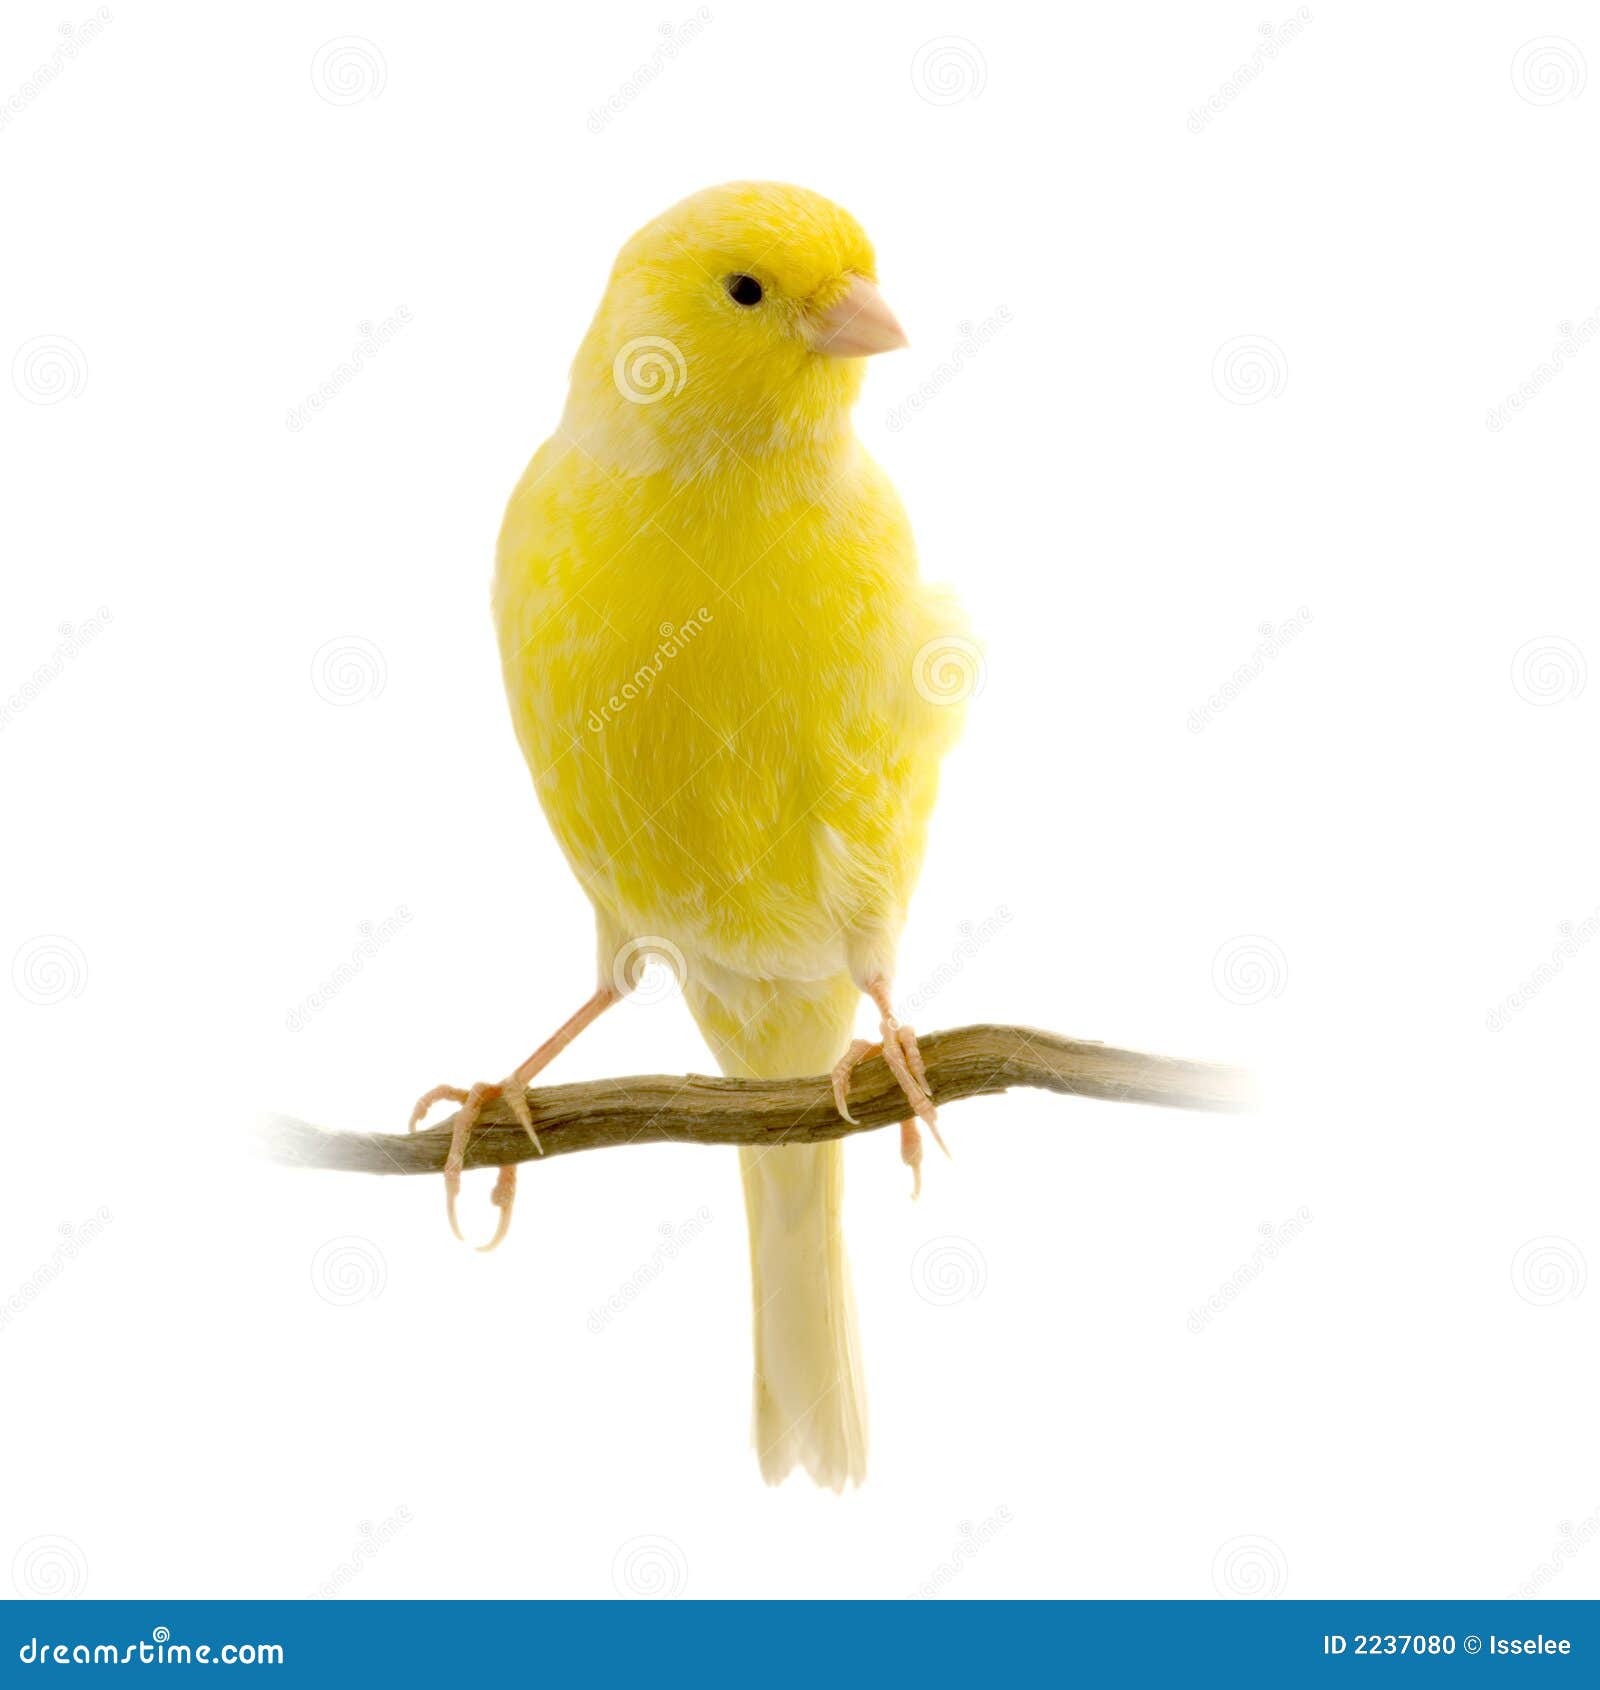 yellow canary on its perch